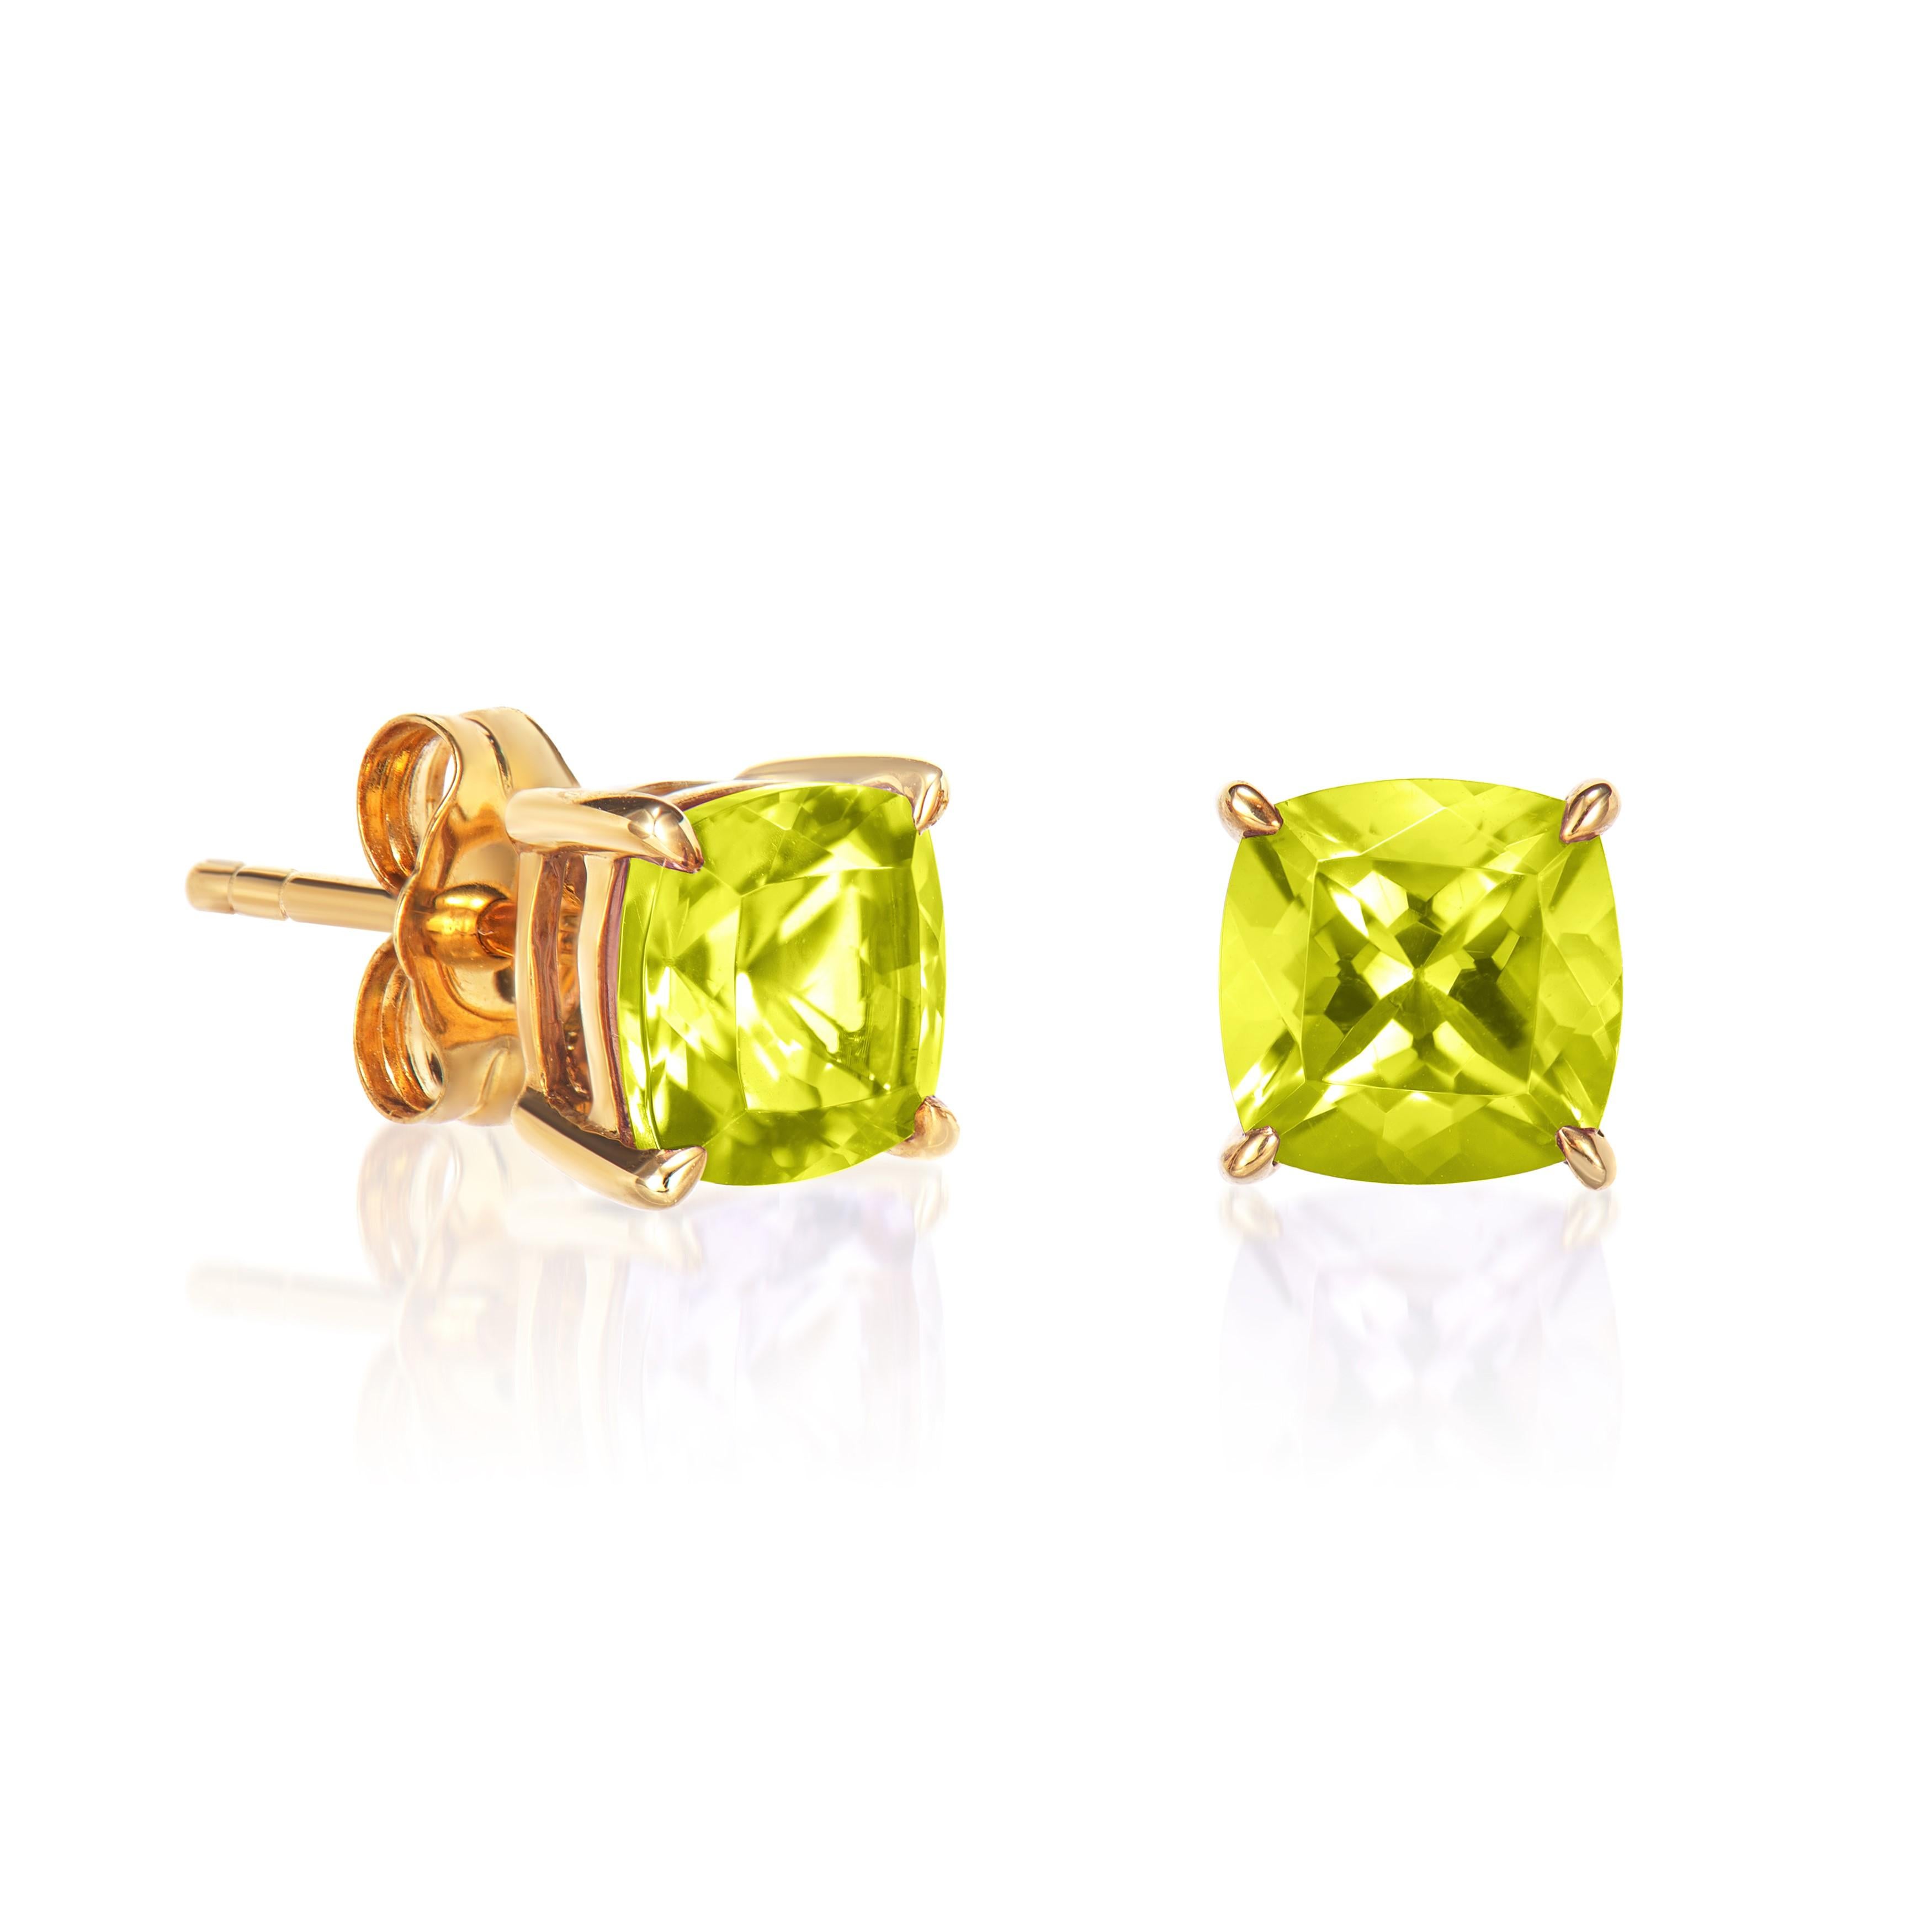 Presented A lovely collection of gems, including Peridot, Amethyst, Sky Blue Topaz and Swiss Blue Topaz is perfect for people who value quality and want to wear it to any occasion or celebration. The yellow gold Peridot Stud Earrings offer a classic